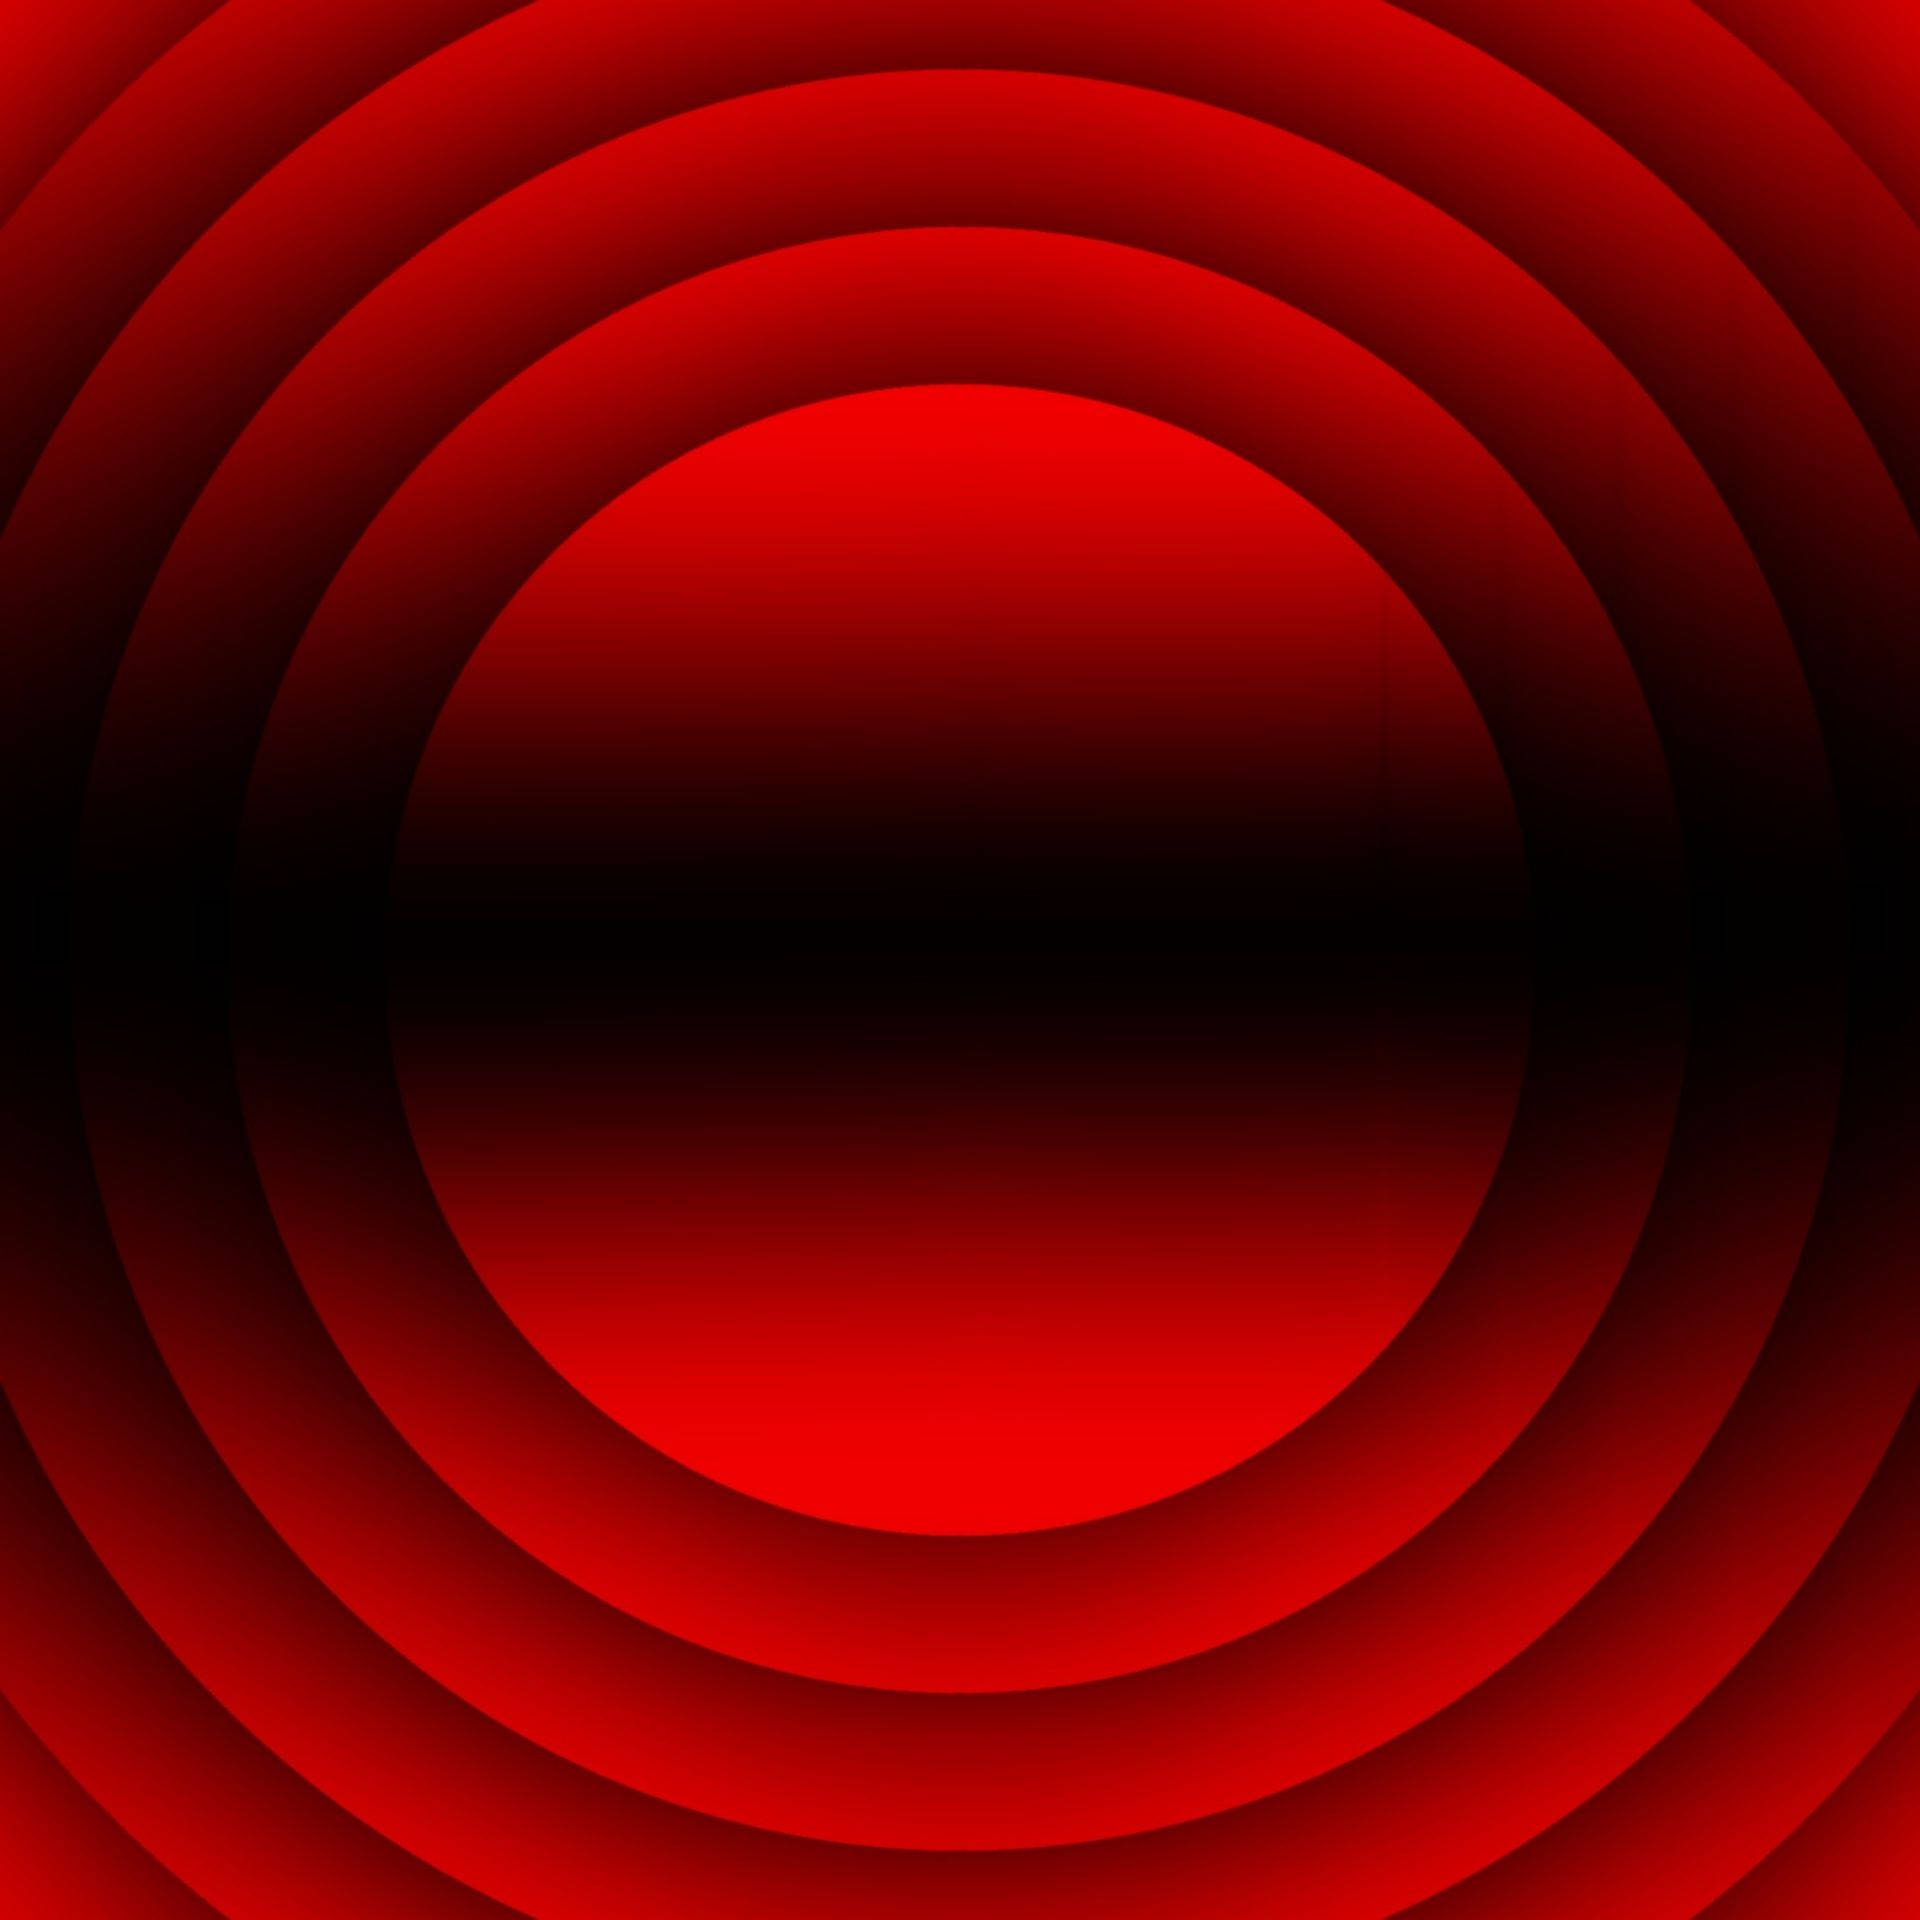 Vibrant Red Circle With A Dark Shadow Background